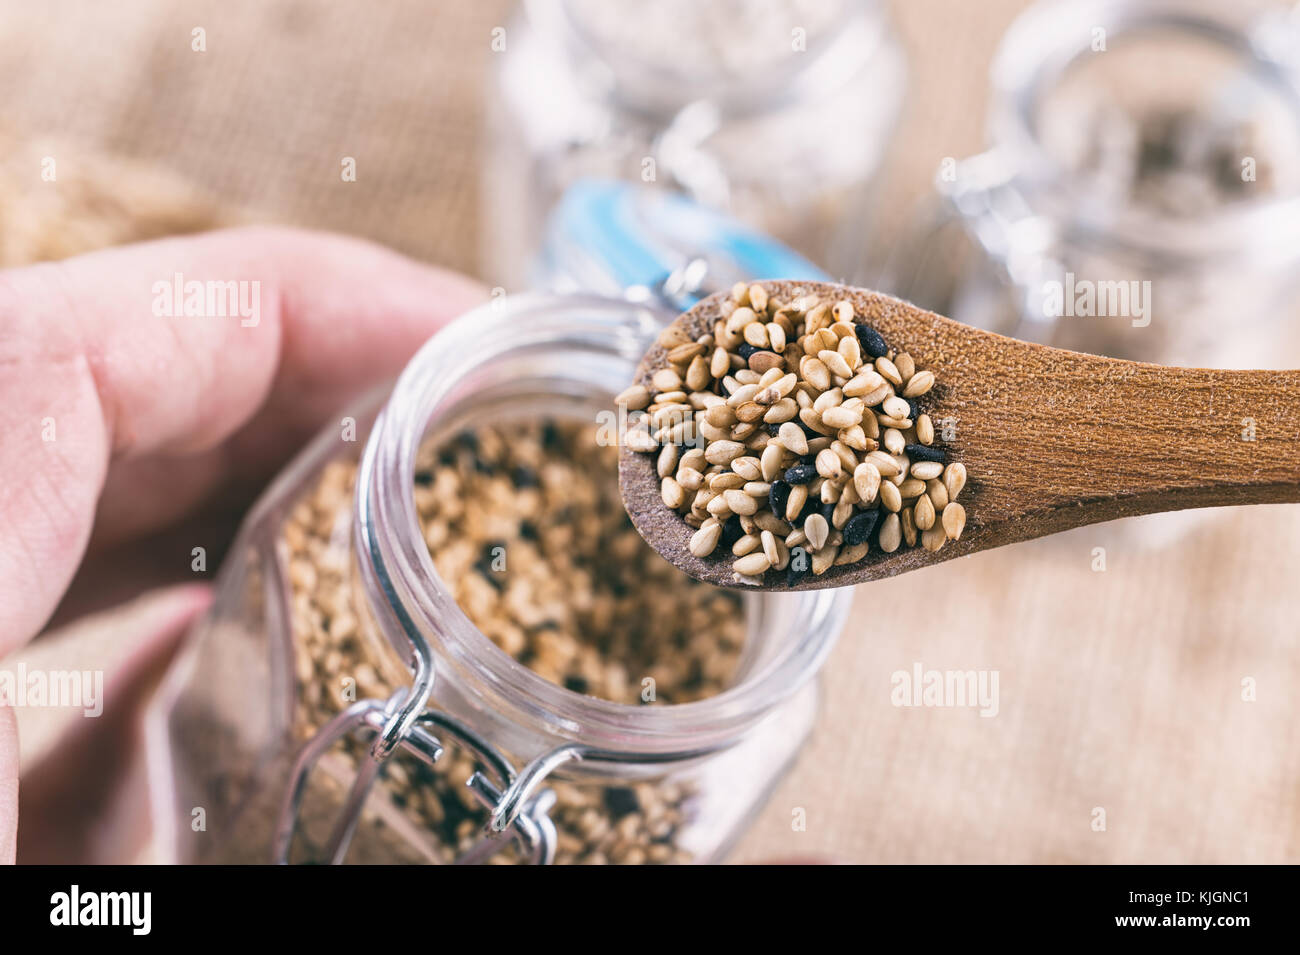 Sesame seeds in wooden spoon on top of a jar Stock Photo